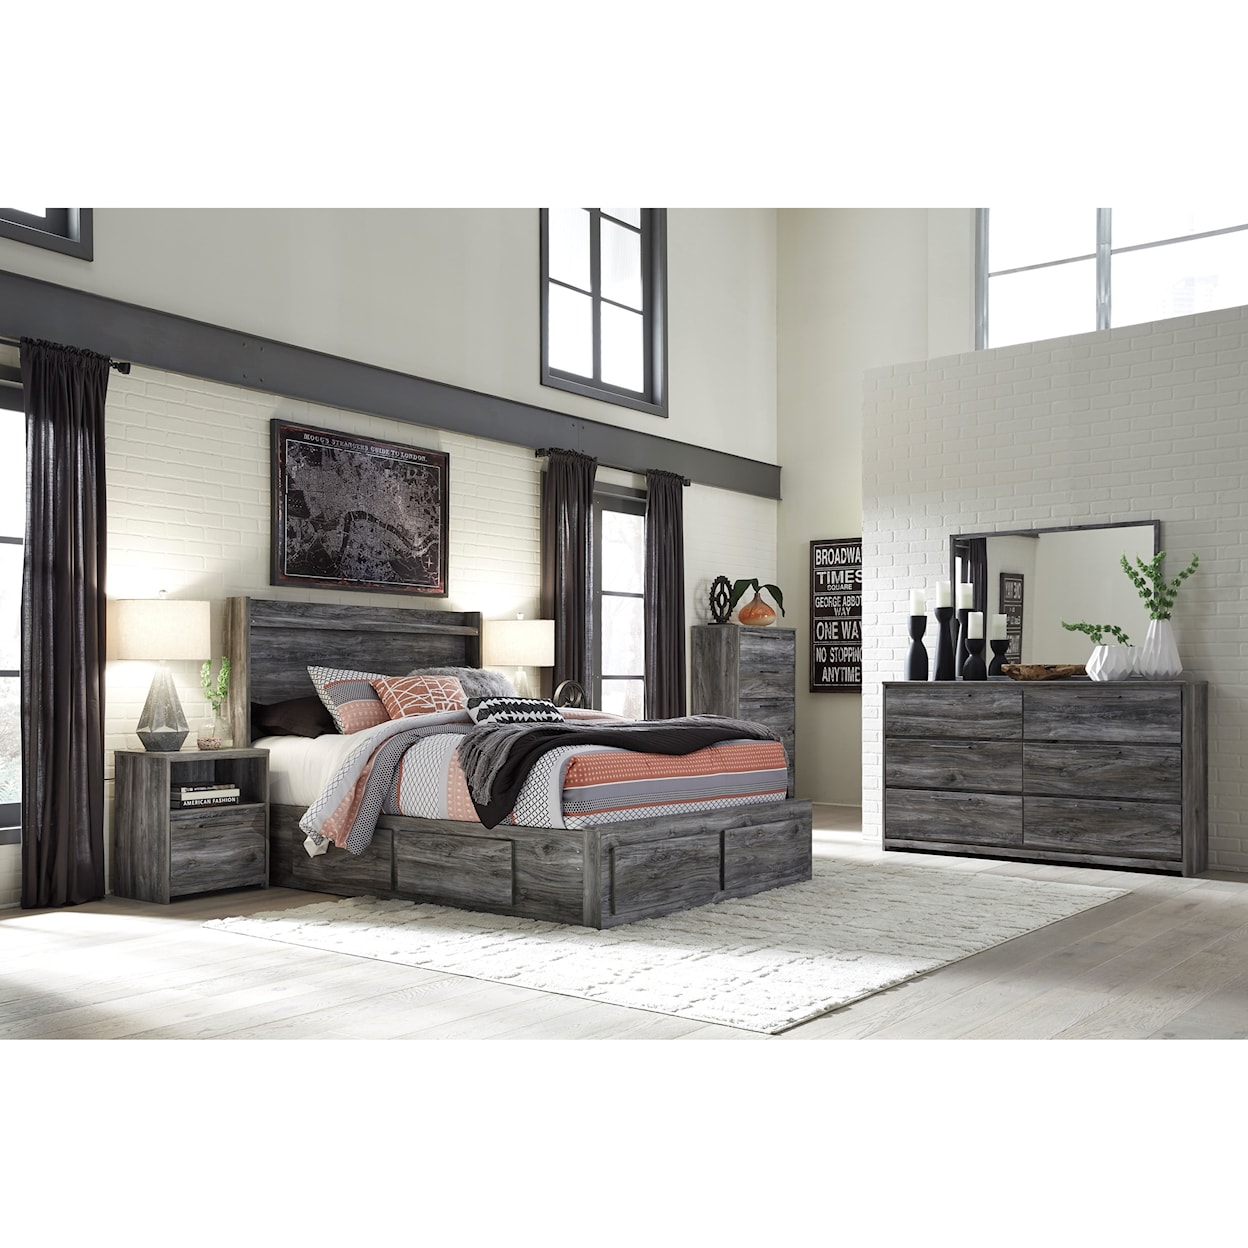 Signature Design by Ashley Baystorm Queen Storage Bed with 6 Drawers